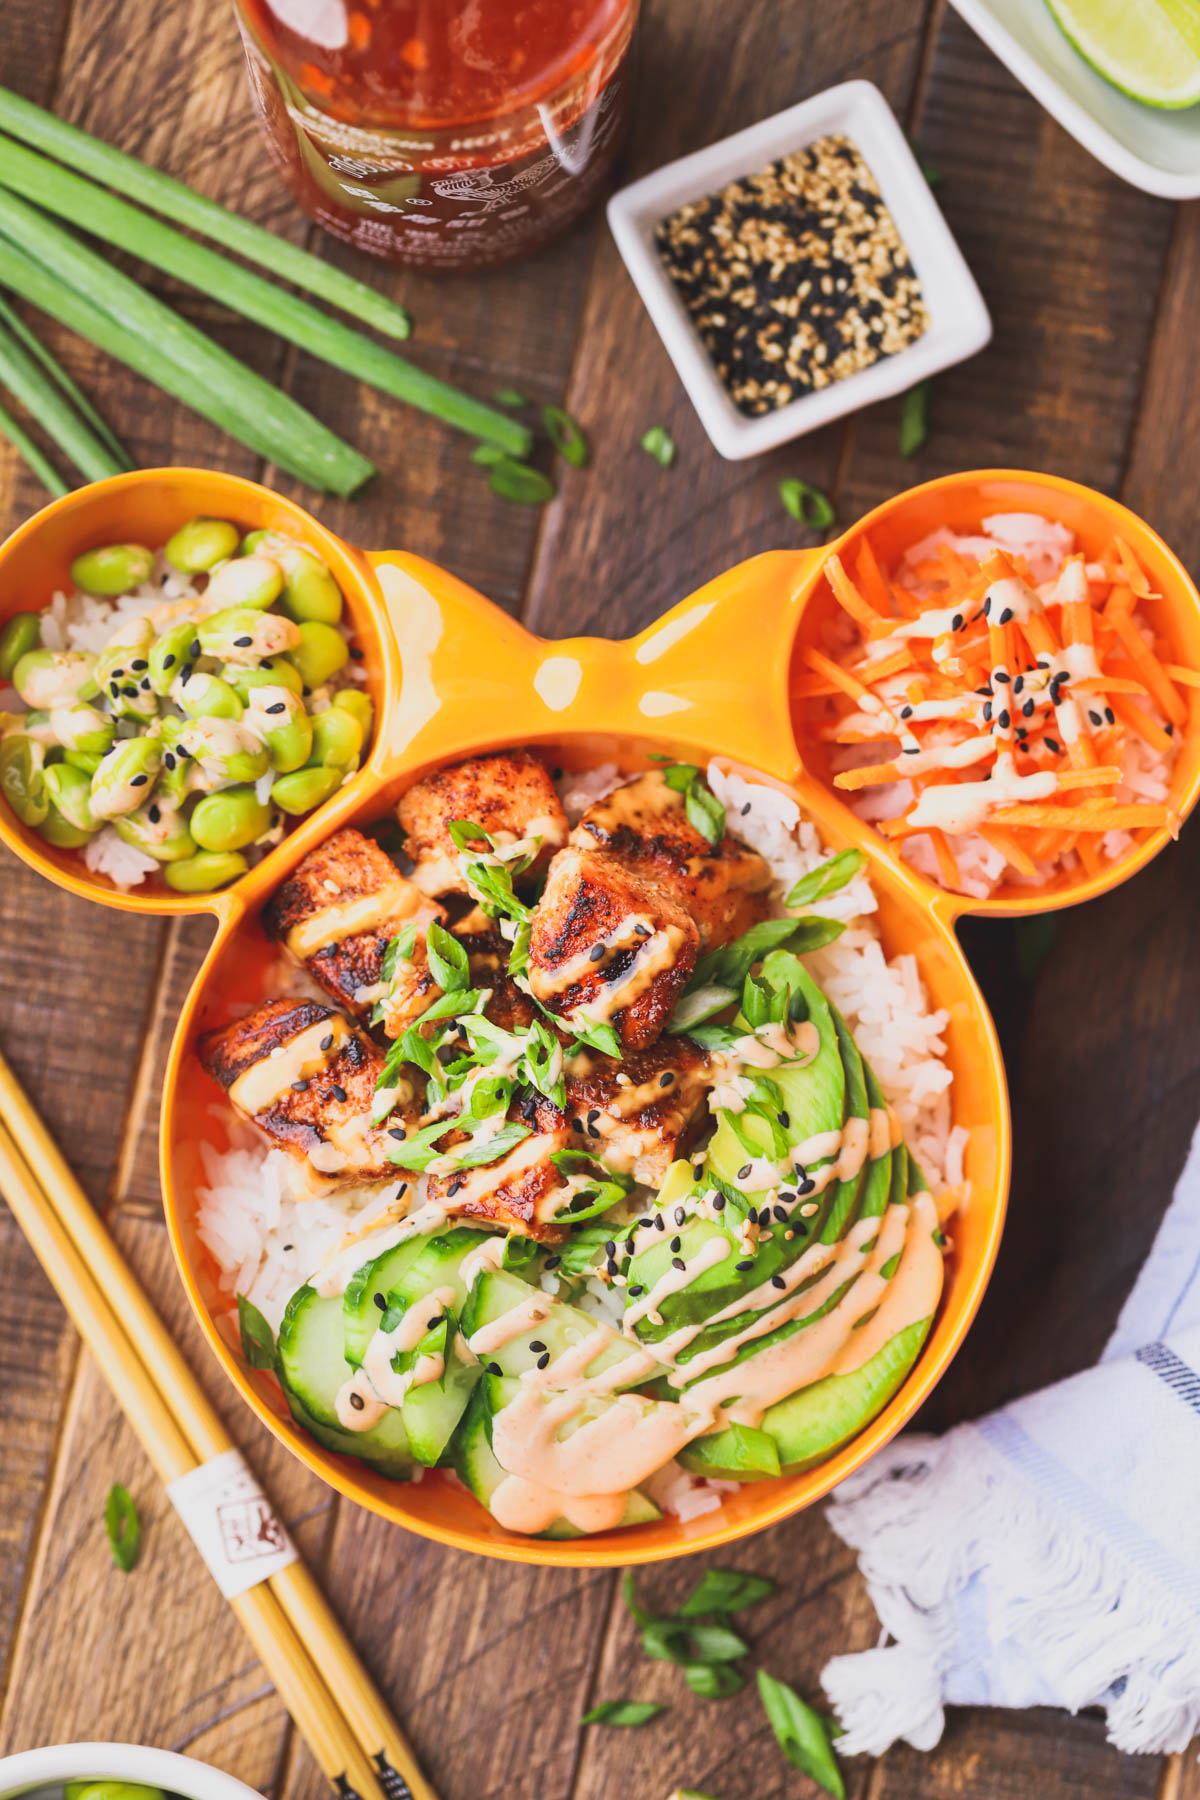 Spicy salmon bowl filled with seasoned salmon, rice, crunchy veggies and spicy mayo.